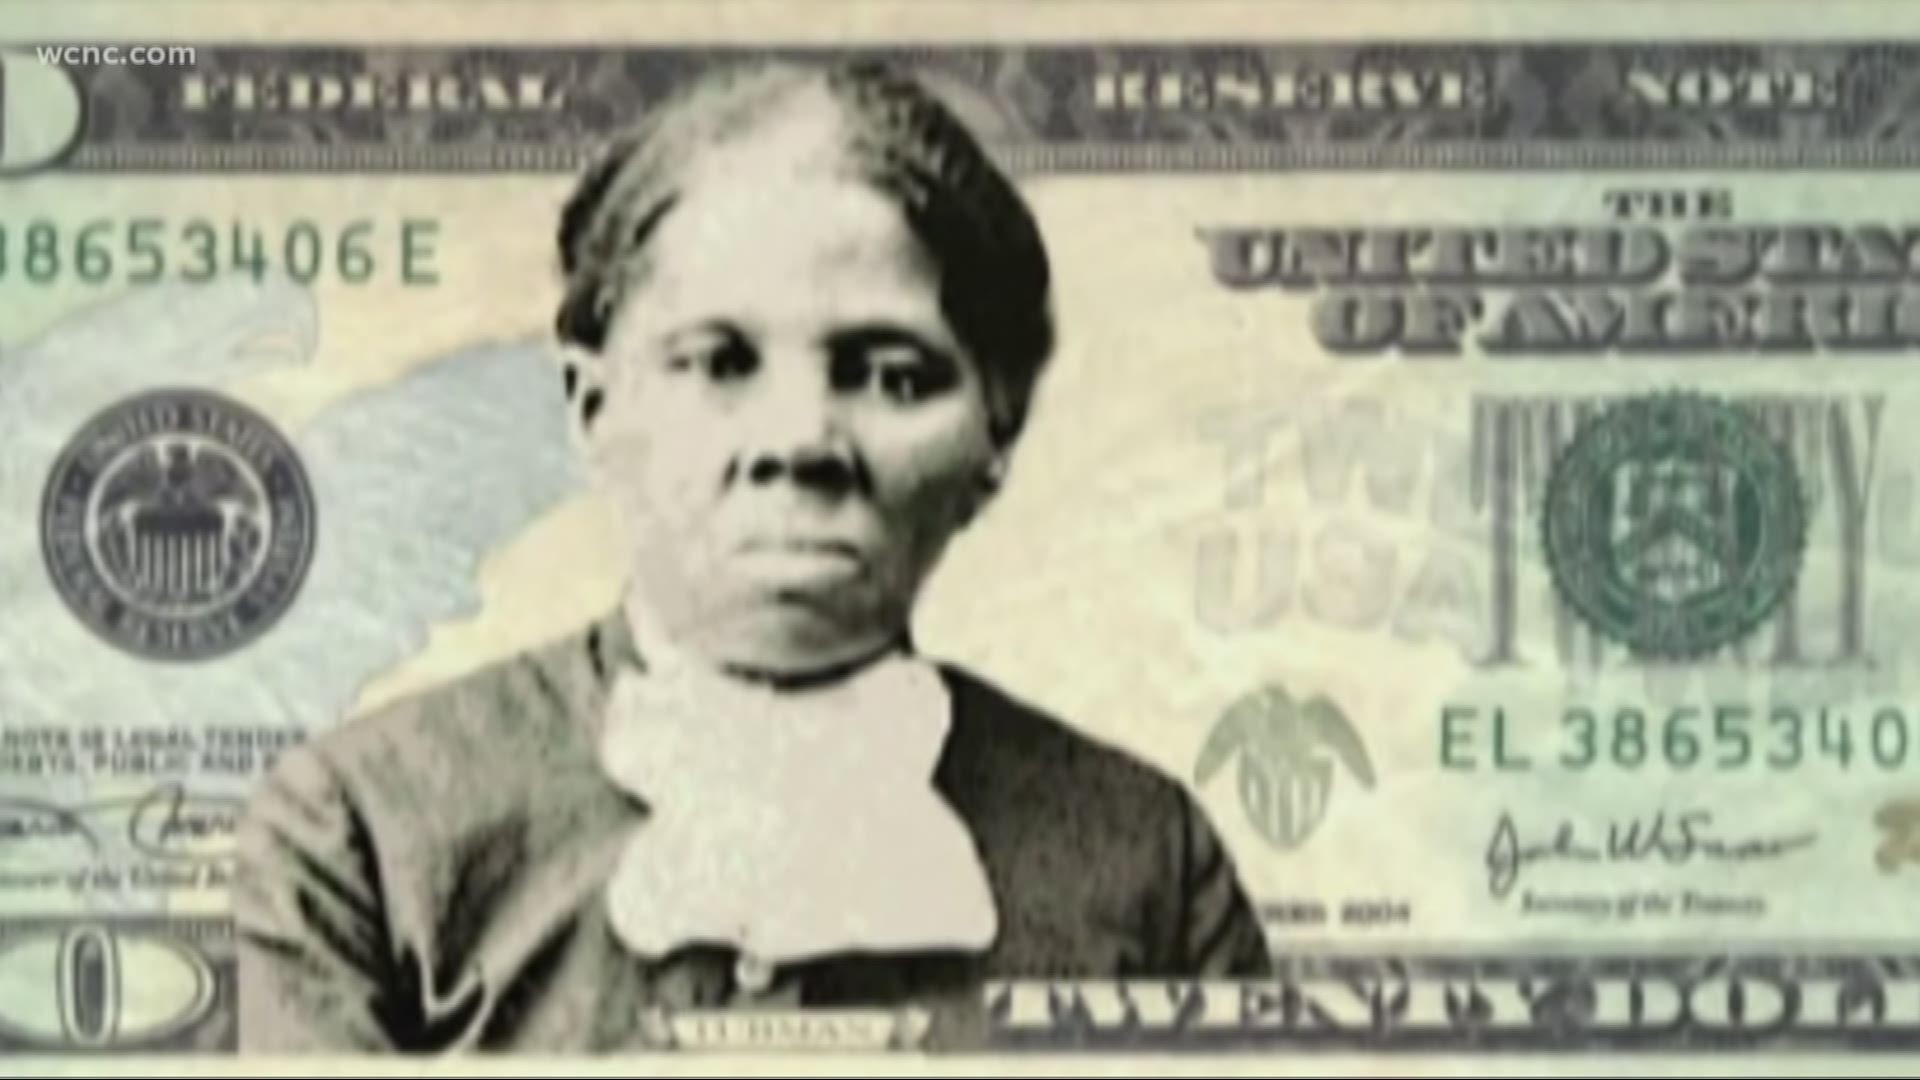 The new $20 bill featuring abolitionist Harriet Tubman will not be released in 2020 as planned. According to Treasury Secretary Steven Mnuchin, the bill likely won't come out until 2028.